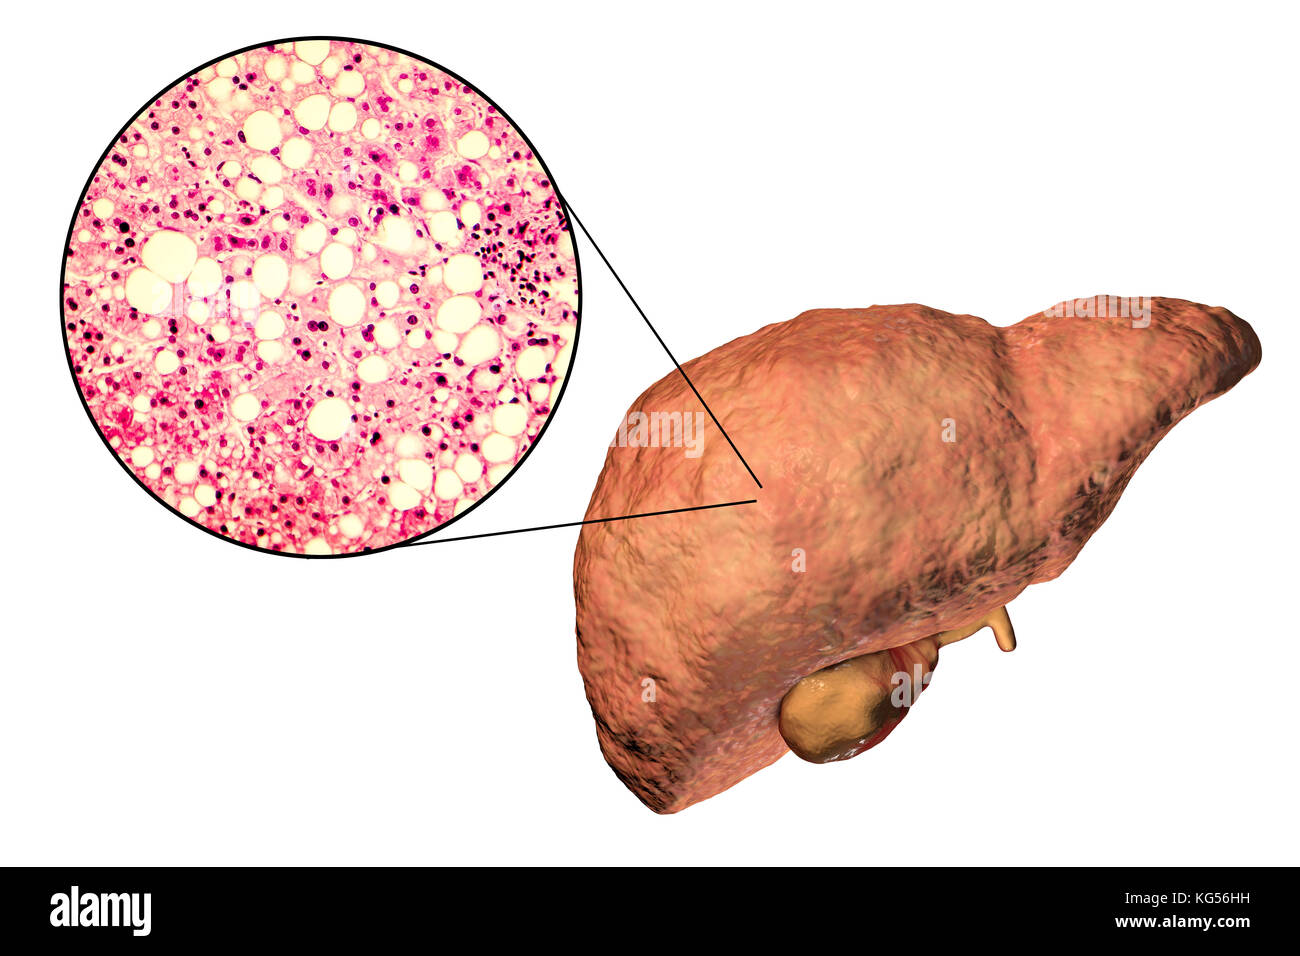 Fatty liver. Computer illustration and light micrograph of a section through the liver of a patient with fatty liver disease. Fatty liver is commonly associated with alcohol or metabolic syndrome (diabetes, hypertension and obesity), but can also be due to any one of many causes. Fatty liver disease is a reversible condition wherein large vacuoles of fat (pale yellow circles) accumulate in liver cells. Stock Photo